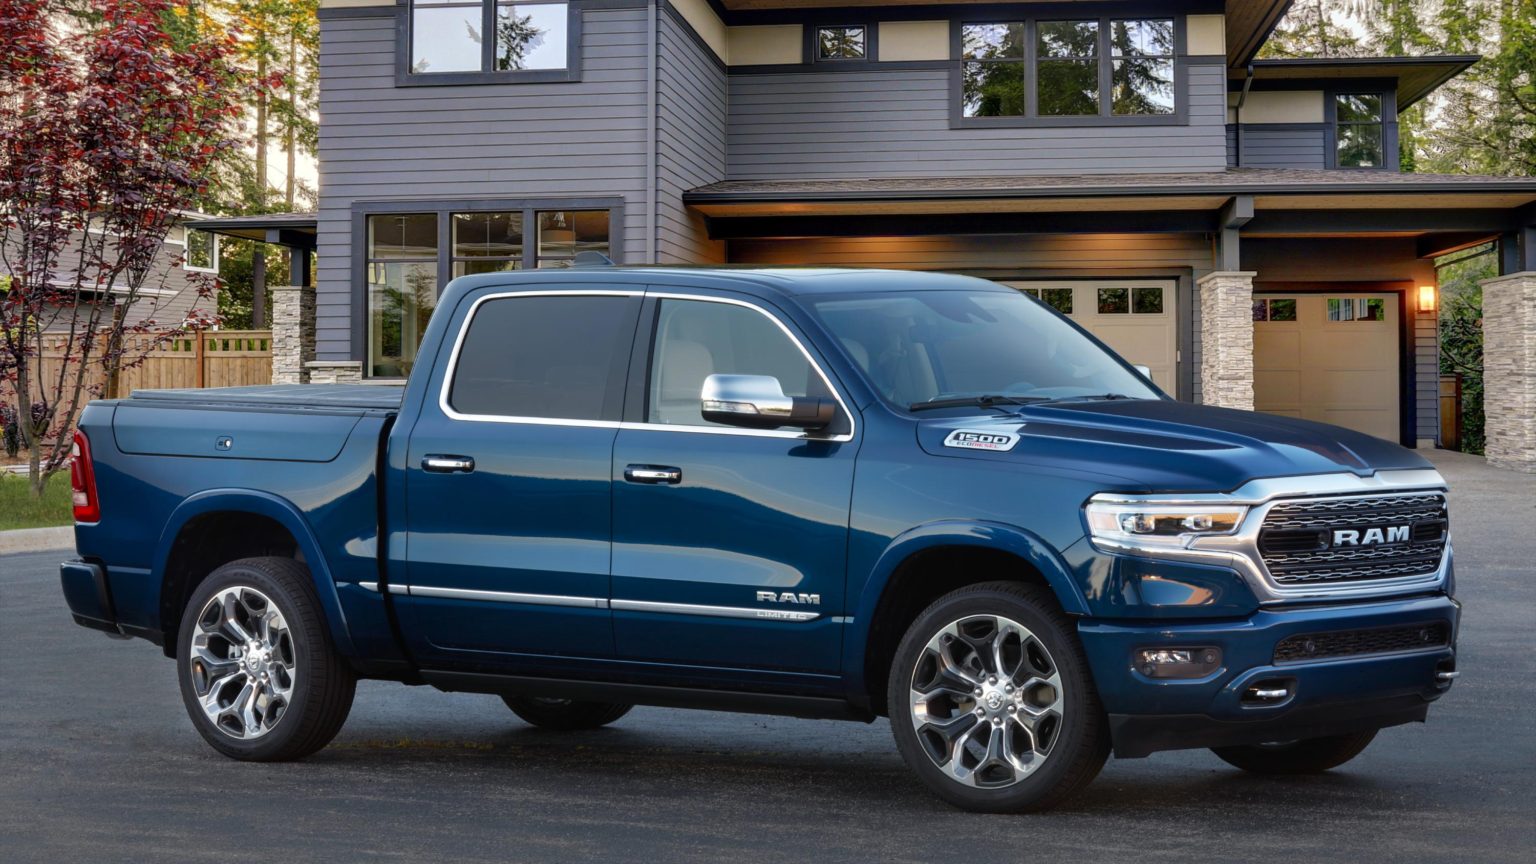 The 2022 Ram 1500 Limited 10th Anniversary Edition gets an exclusive blue paint color.